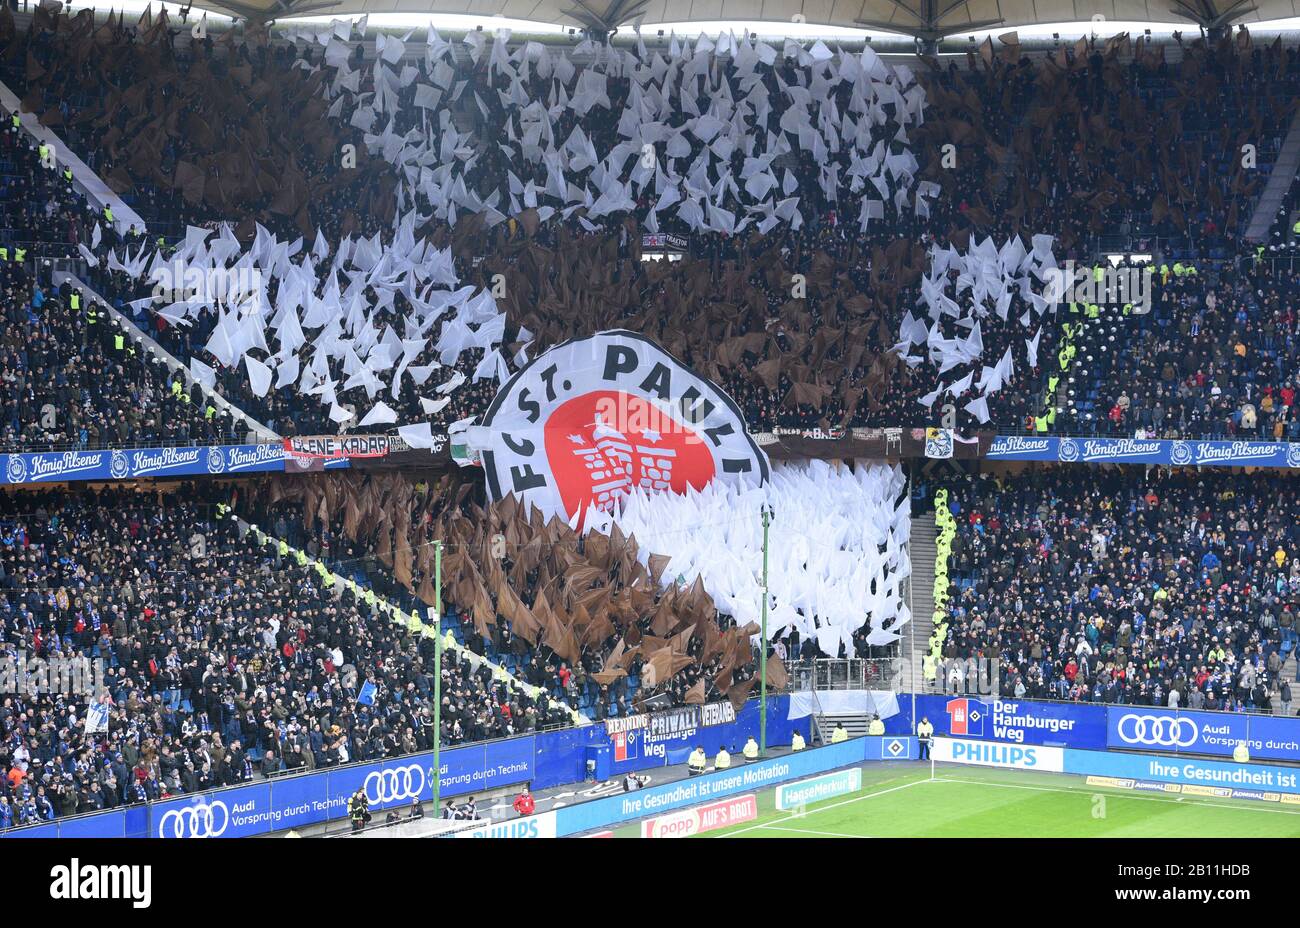 Hamburg, Germany. 22nd Feb, 2020. Football: 2nd Bundesliga, 23rd matchday: Hamburger SV - FC St.Pauli in the Volksparkstadion. The fans of FC St.Pauli hold flags and a large logo banner. Credit: Daniel Bockwoldt/dpa - IMPORTANT NOTE: In accordance with the regulations of the DFL Deutsche Fußball Liga and the DFB Deutscher Fußball-Bund, it is prohibited to exploit or have exploited in the stadium and/or from the game taken photographs in the form of sequence images and/or video-like photo series./dpa/Alamy Live News Stock Photo